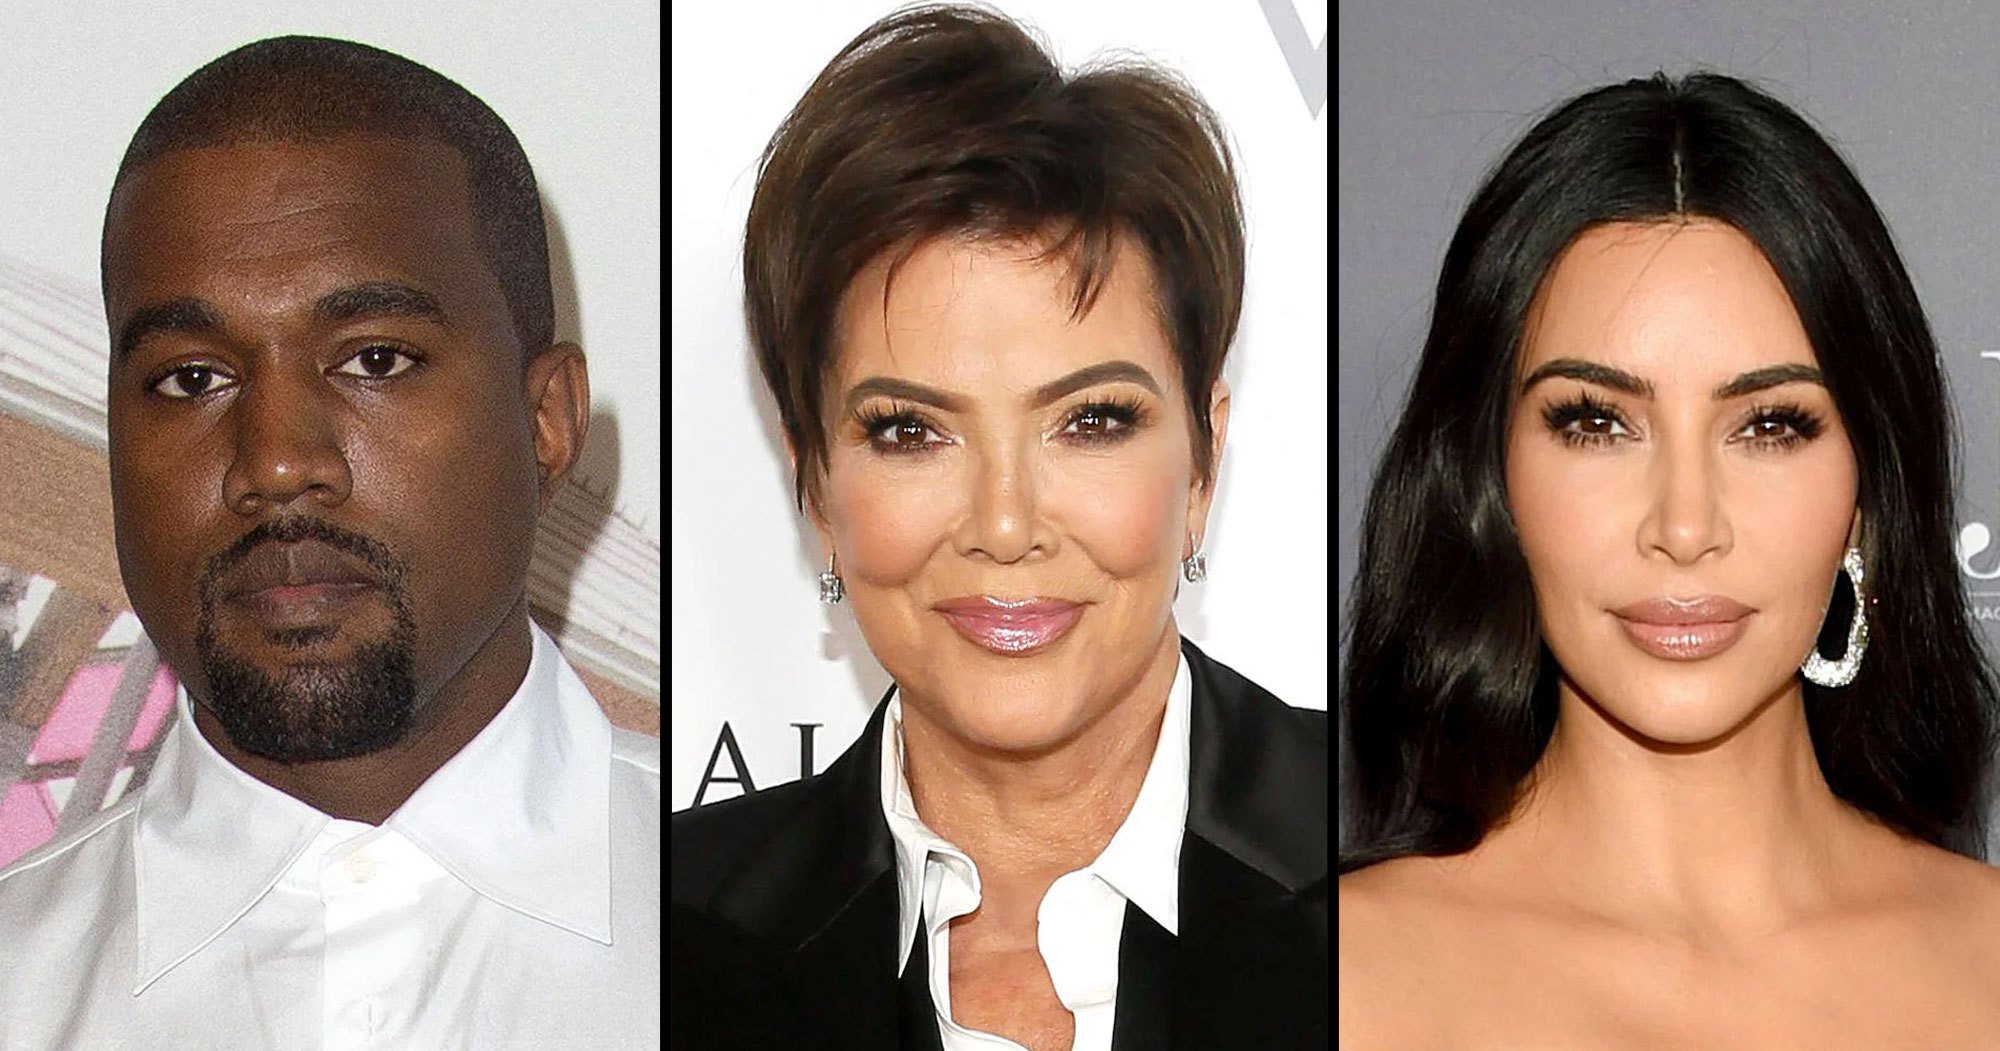 Xxx Iceland School Porn Video Girls - Kanye West Calls Out Kris Jenner, Claims Porn 'Destroyed' Family | Us Weekly